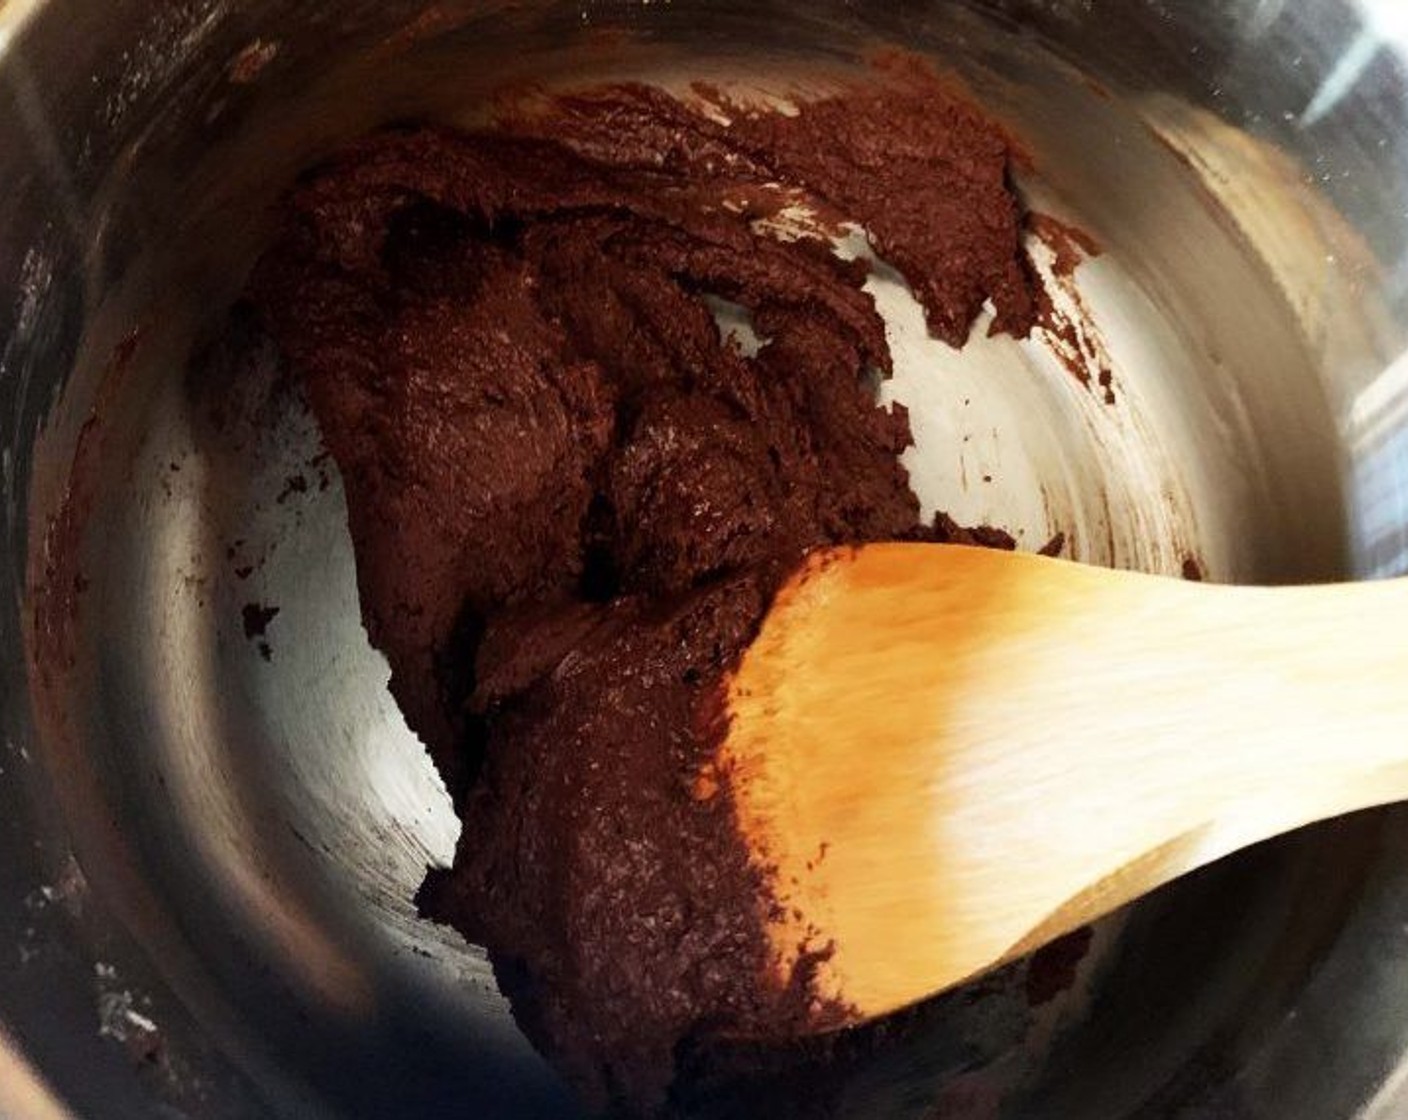 step 6 In a saucepan, heat up Dark Chocolate (1 cup), Brown Sugar (3 Tbsp), and Rice Flour (1/4 cup). Stir constantly until a paste forms